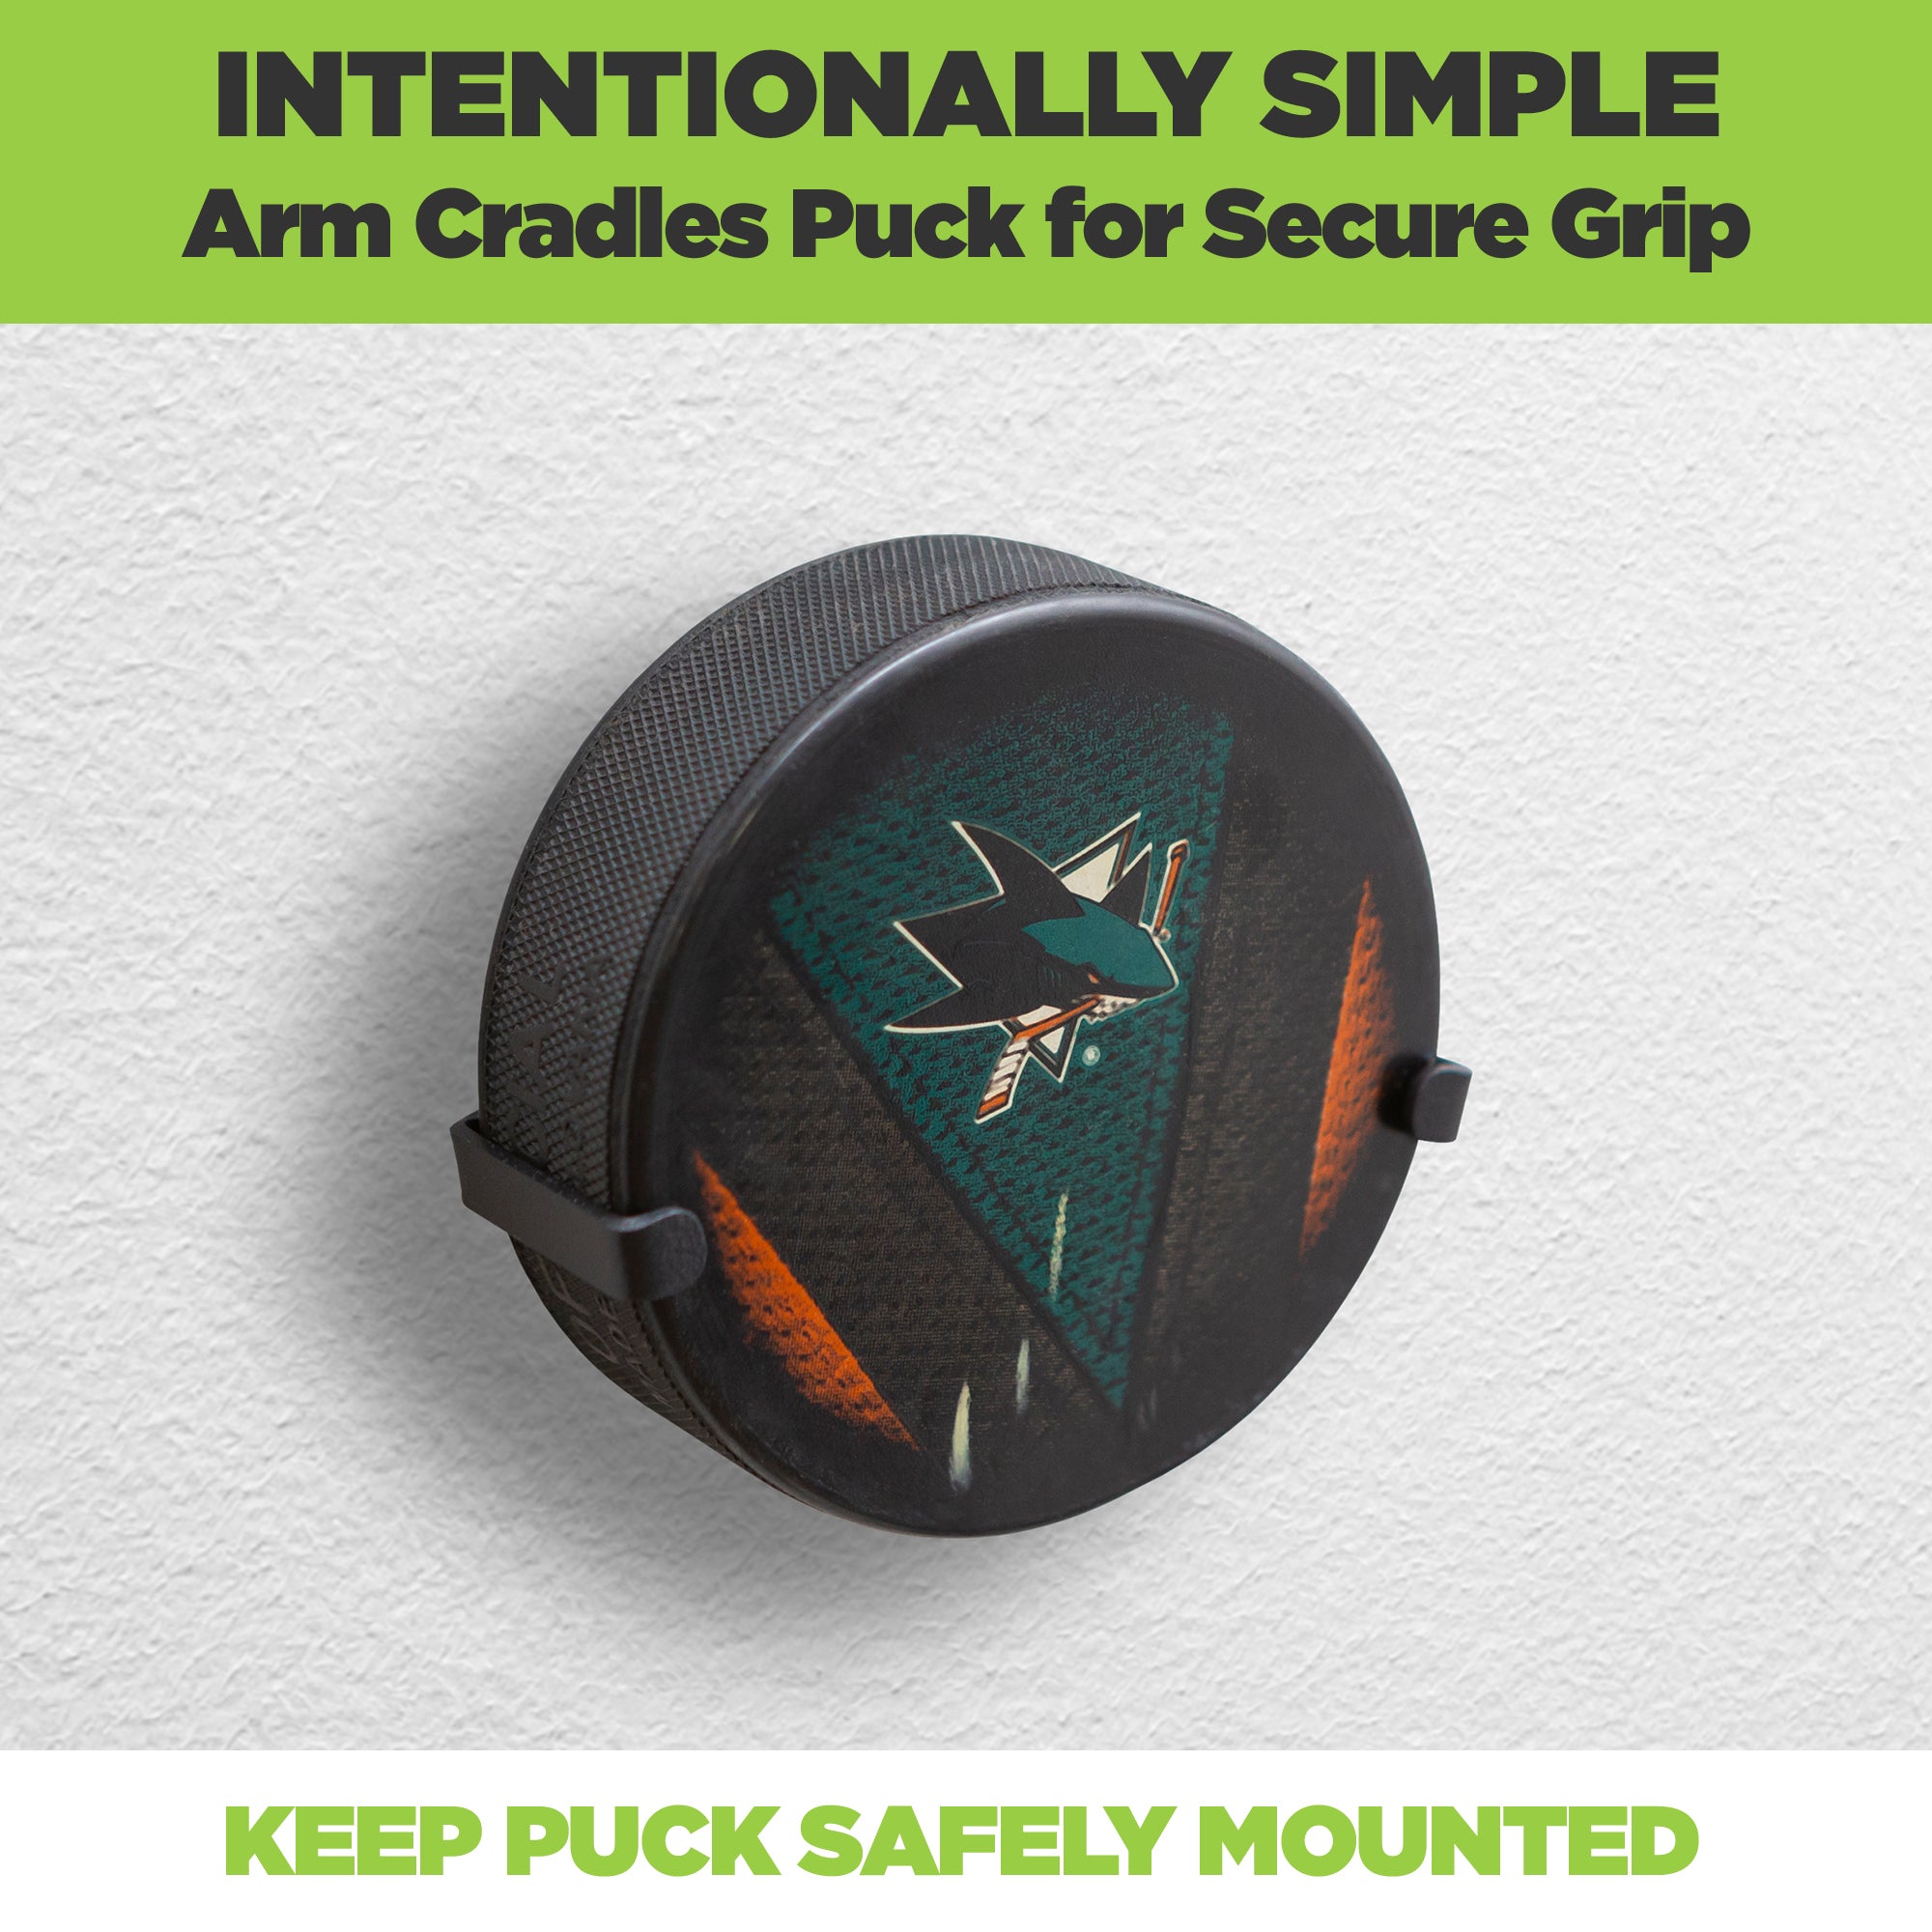 4. HIDEit Mounts Puck single-piece wall mount with San Jose Sharks NHL hockey puck safely mounted.